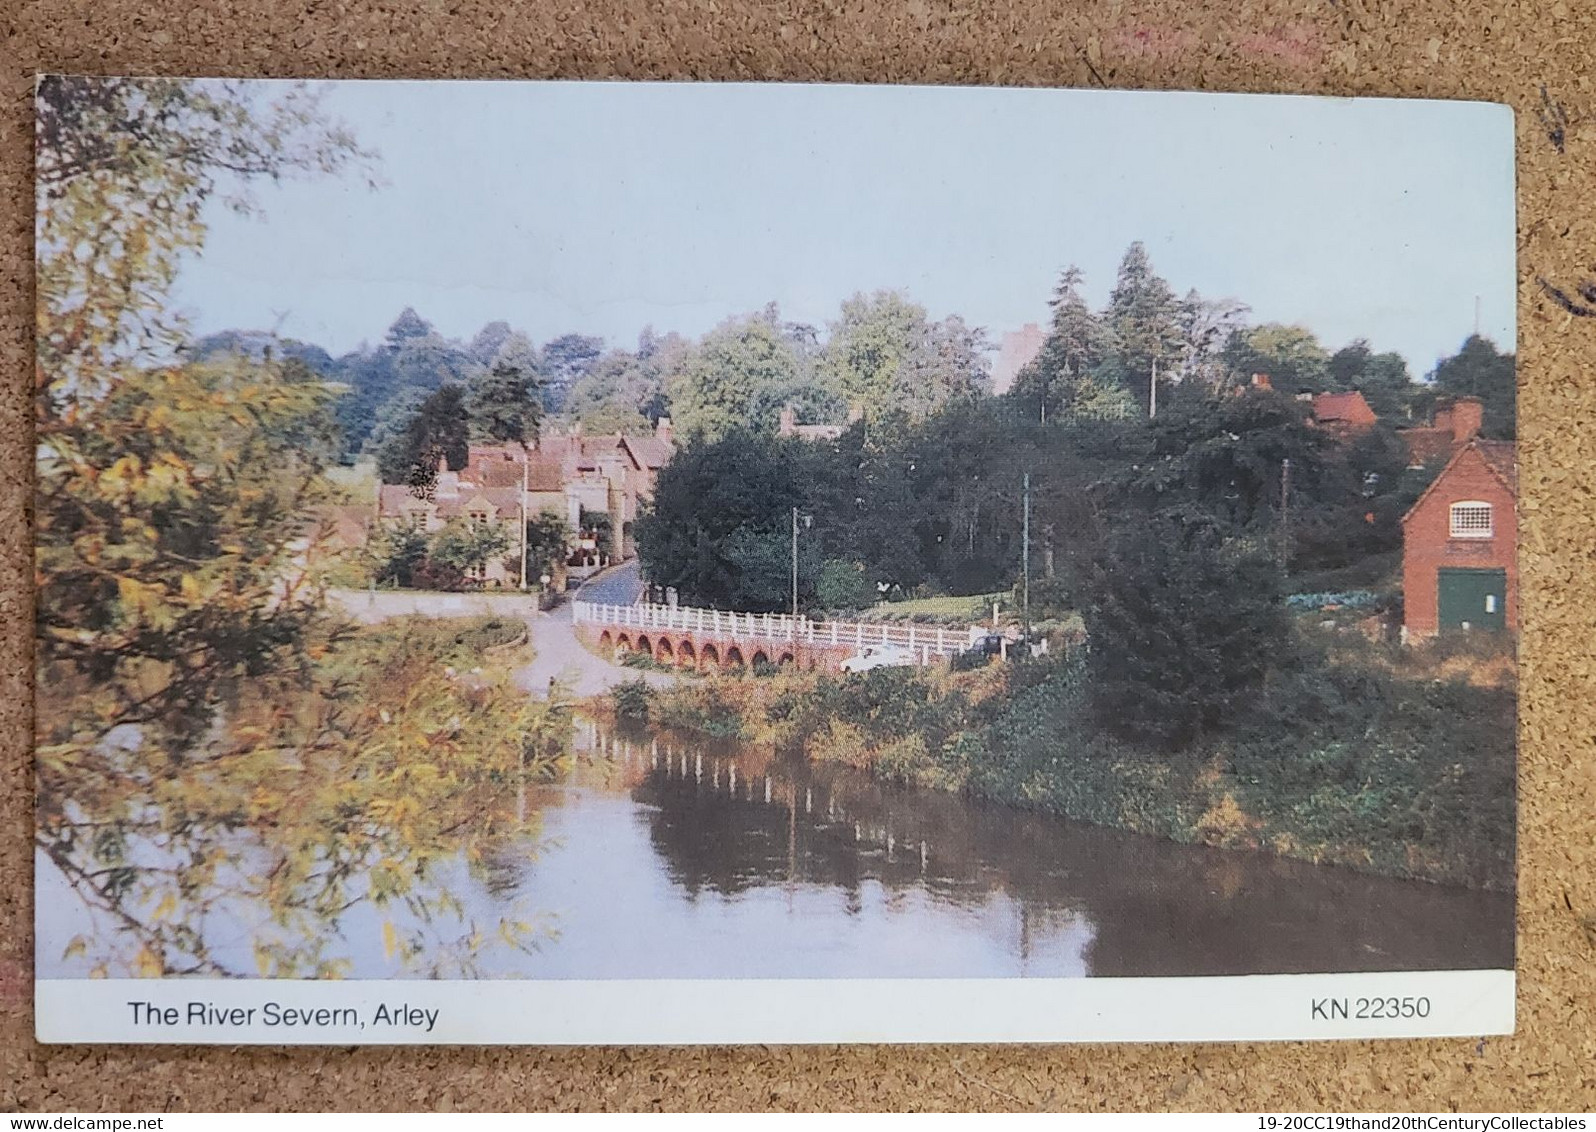 2 UNUSED  CARDS - A PRETTY  ONE OF THE RIVER SEVERN AT ARLEY, WORC'S AND  A MULTI PIC, B & W ONE OF FEATURES IN WORCESTE - Exeter